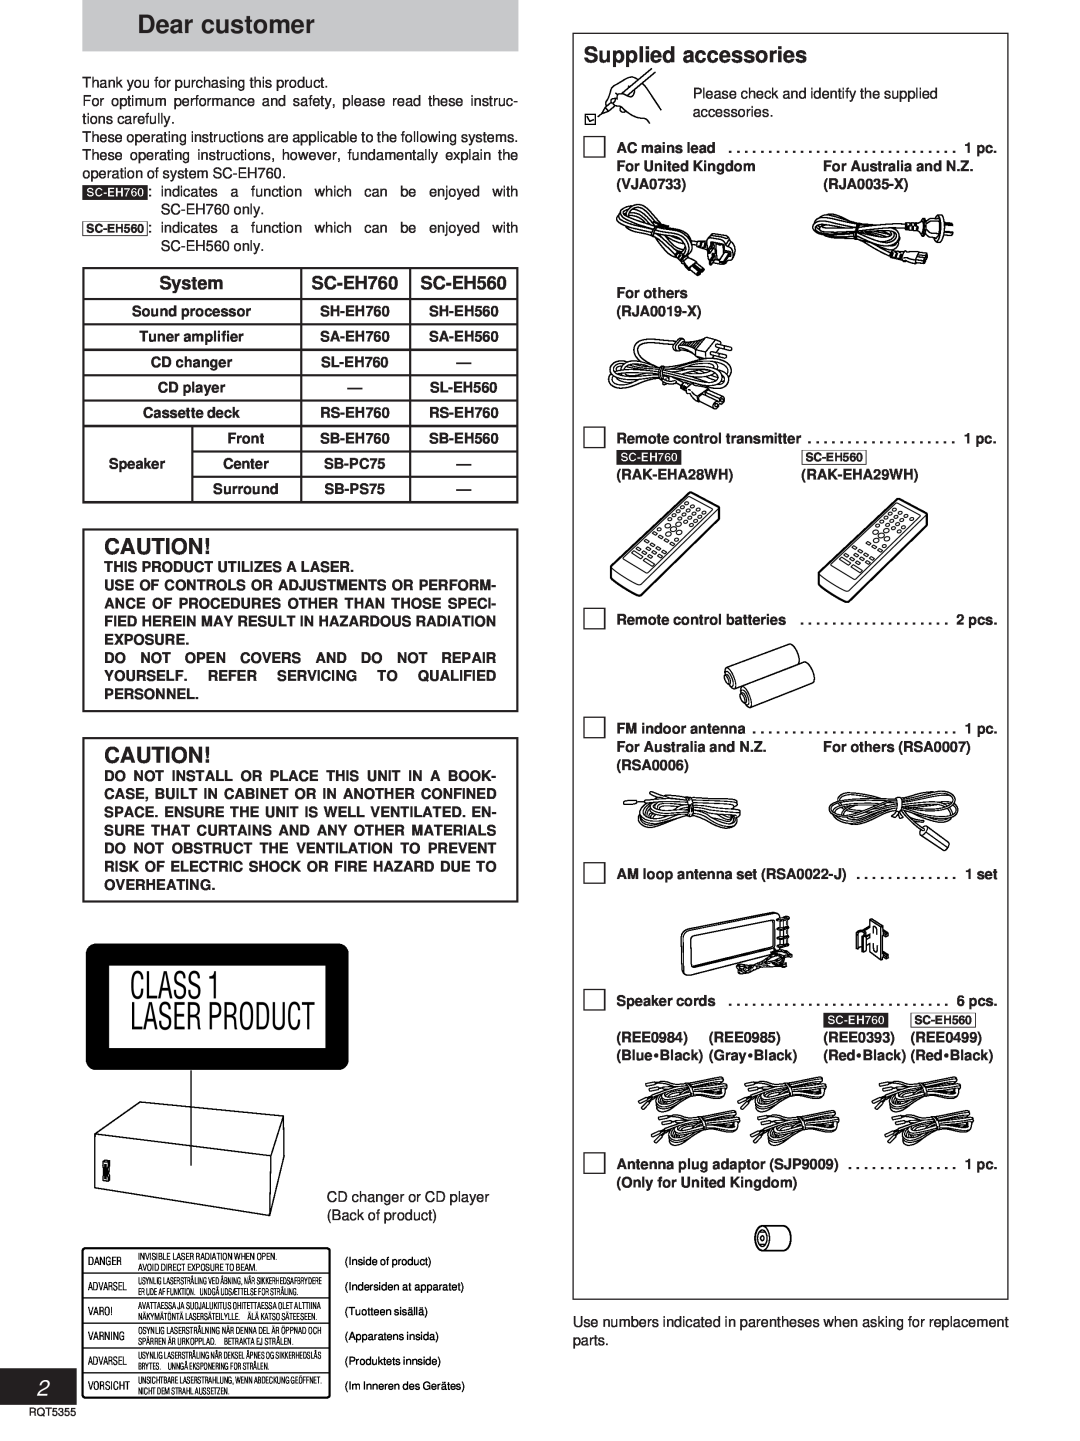 Technics manual Class Laser Product, Supplied accessories, System, SC-EH760 SC-EH560 